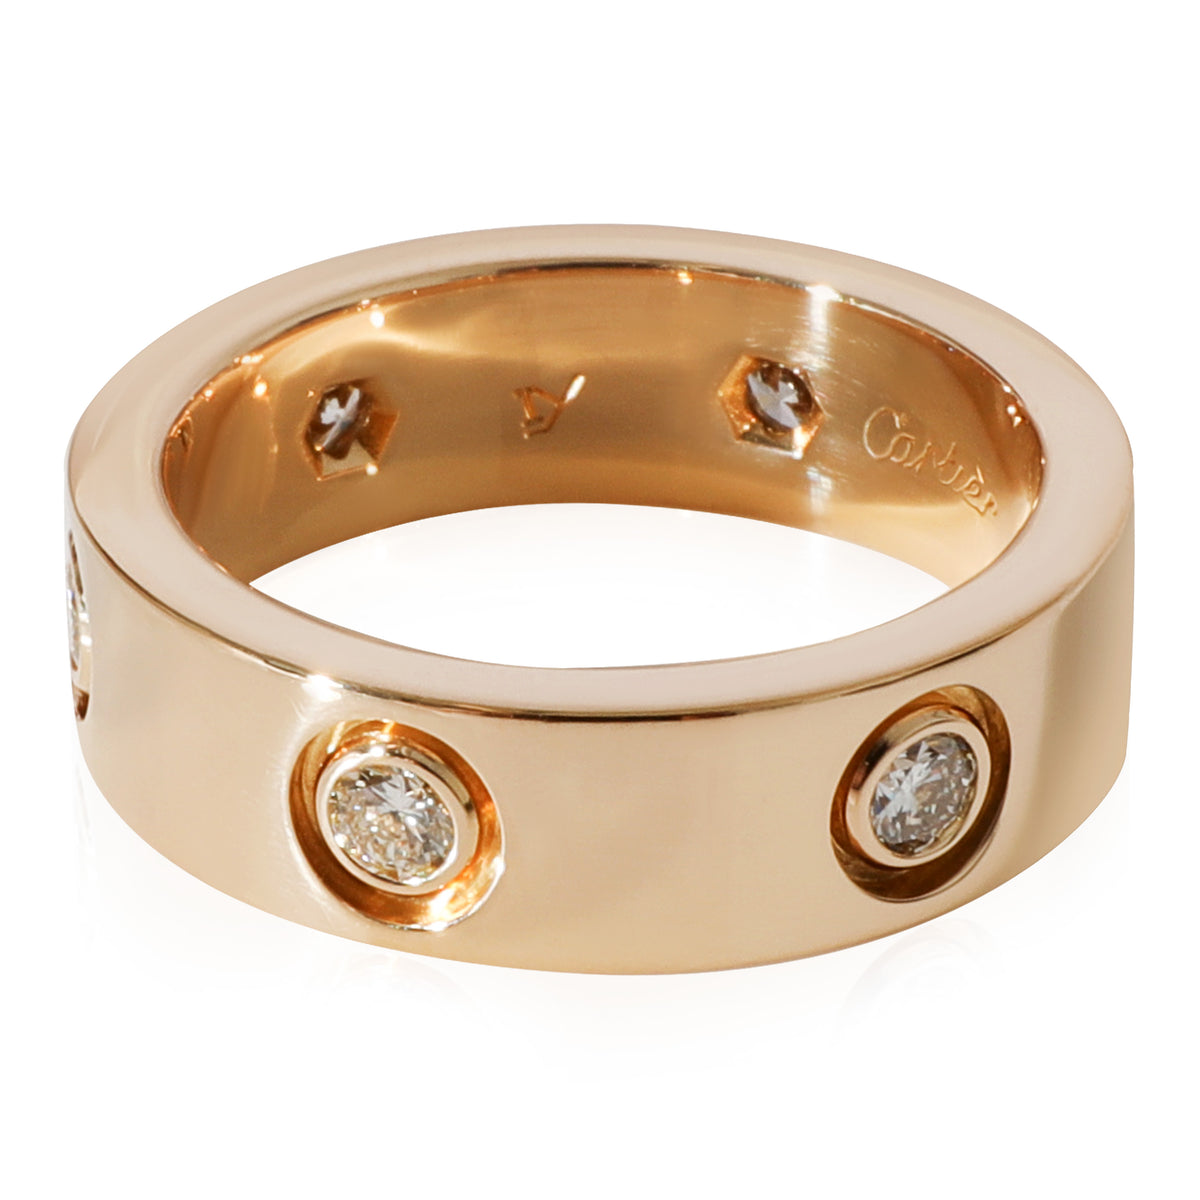 CARTIER GOLD AND DIAMOND 'LOVE' RING